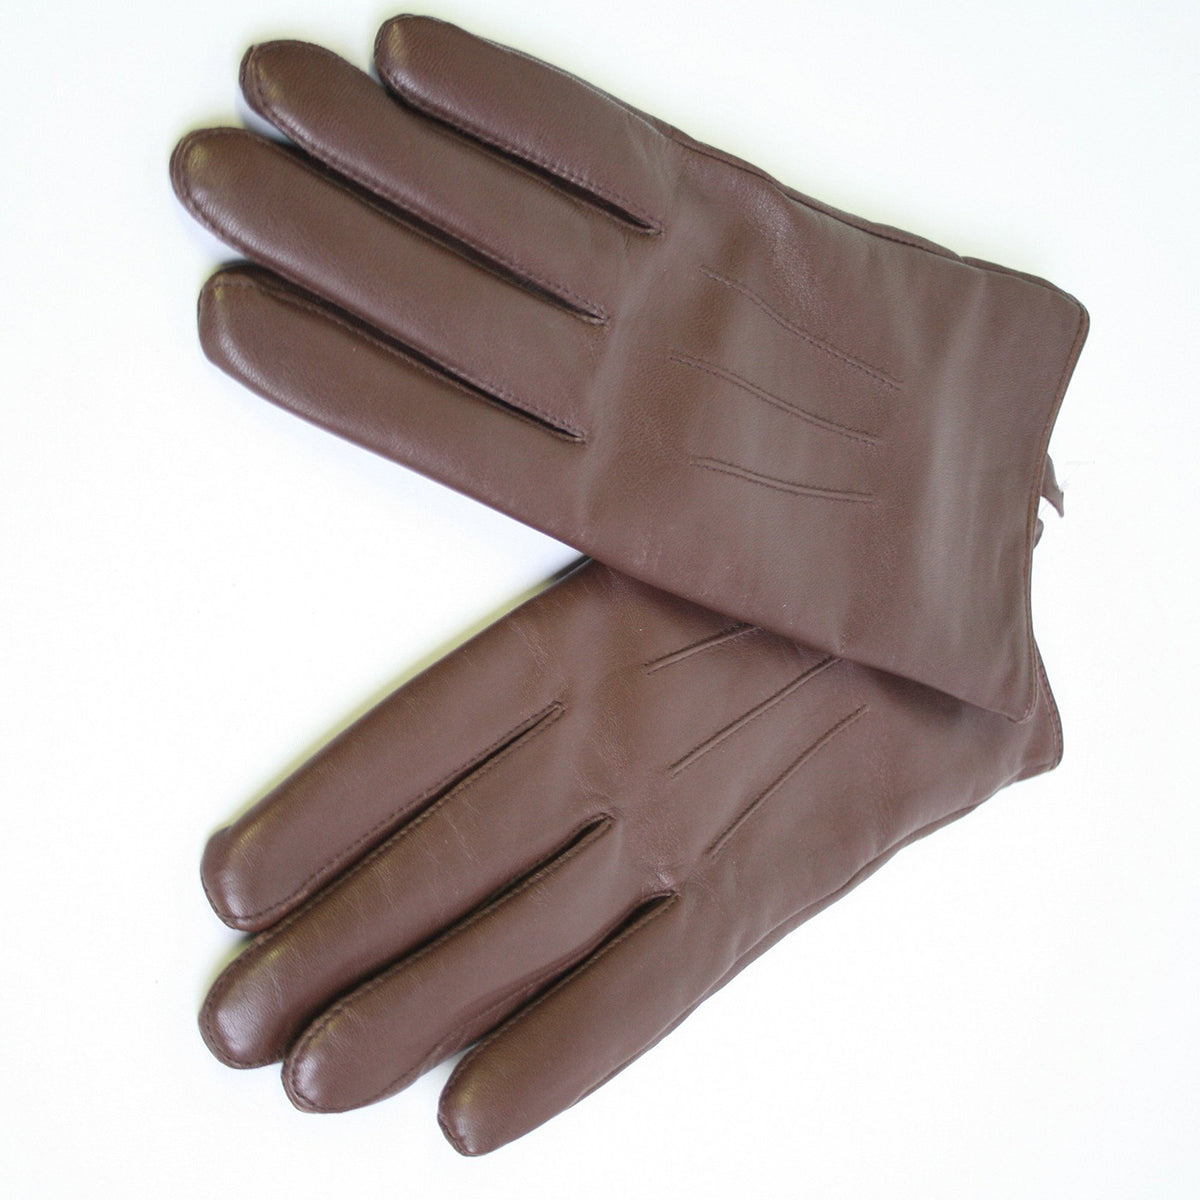 Carrigan leather gloves